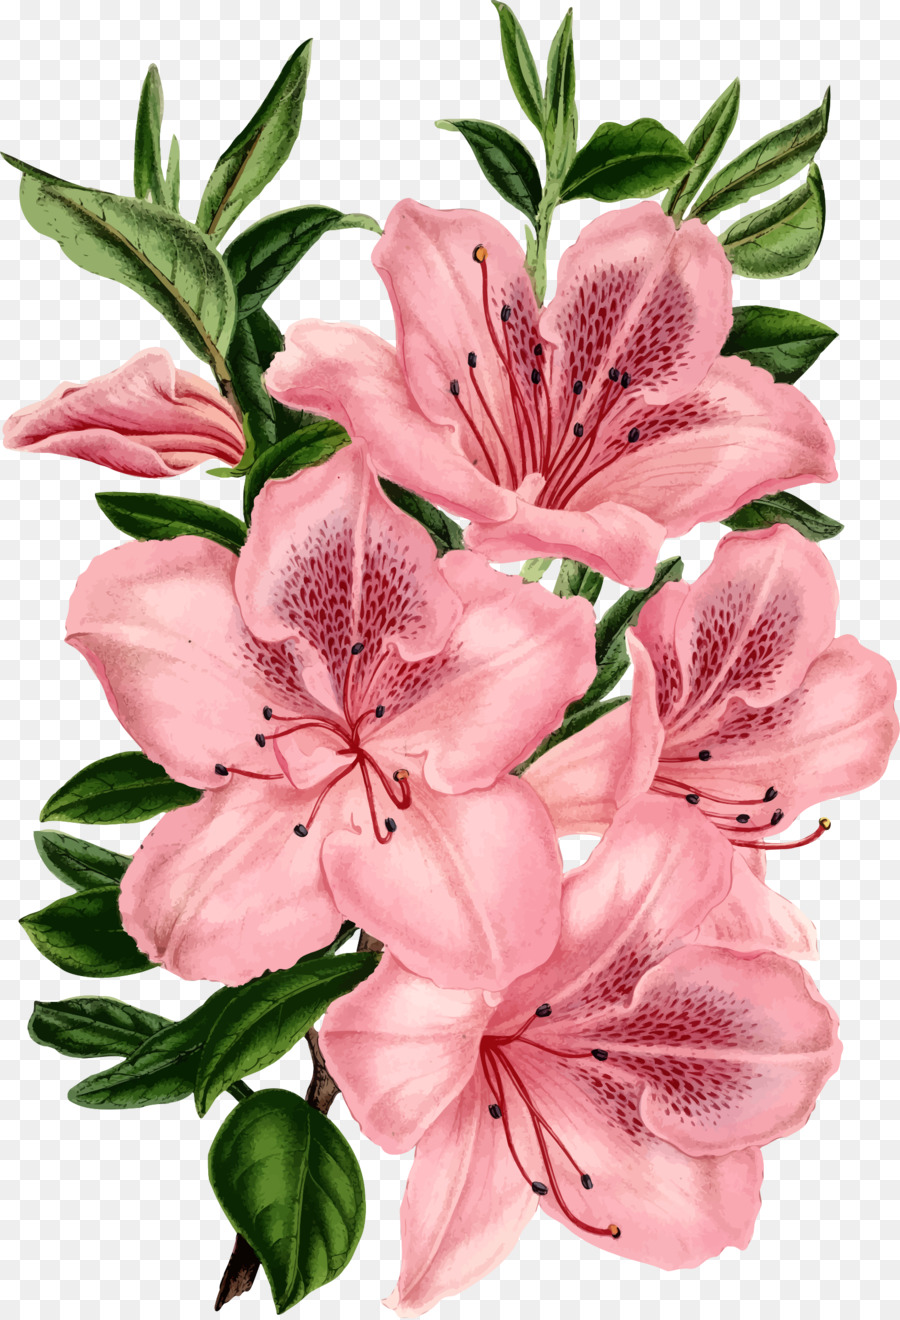 Drawing Pink flowers Clip art - flowers flowers border png download - 1638*2400 - Free Transparent Drawing png Download.